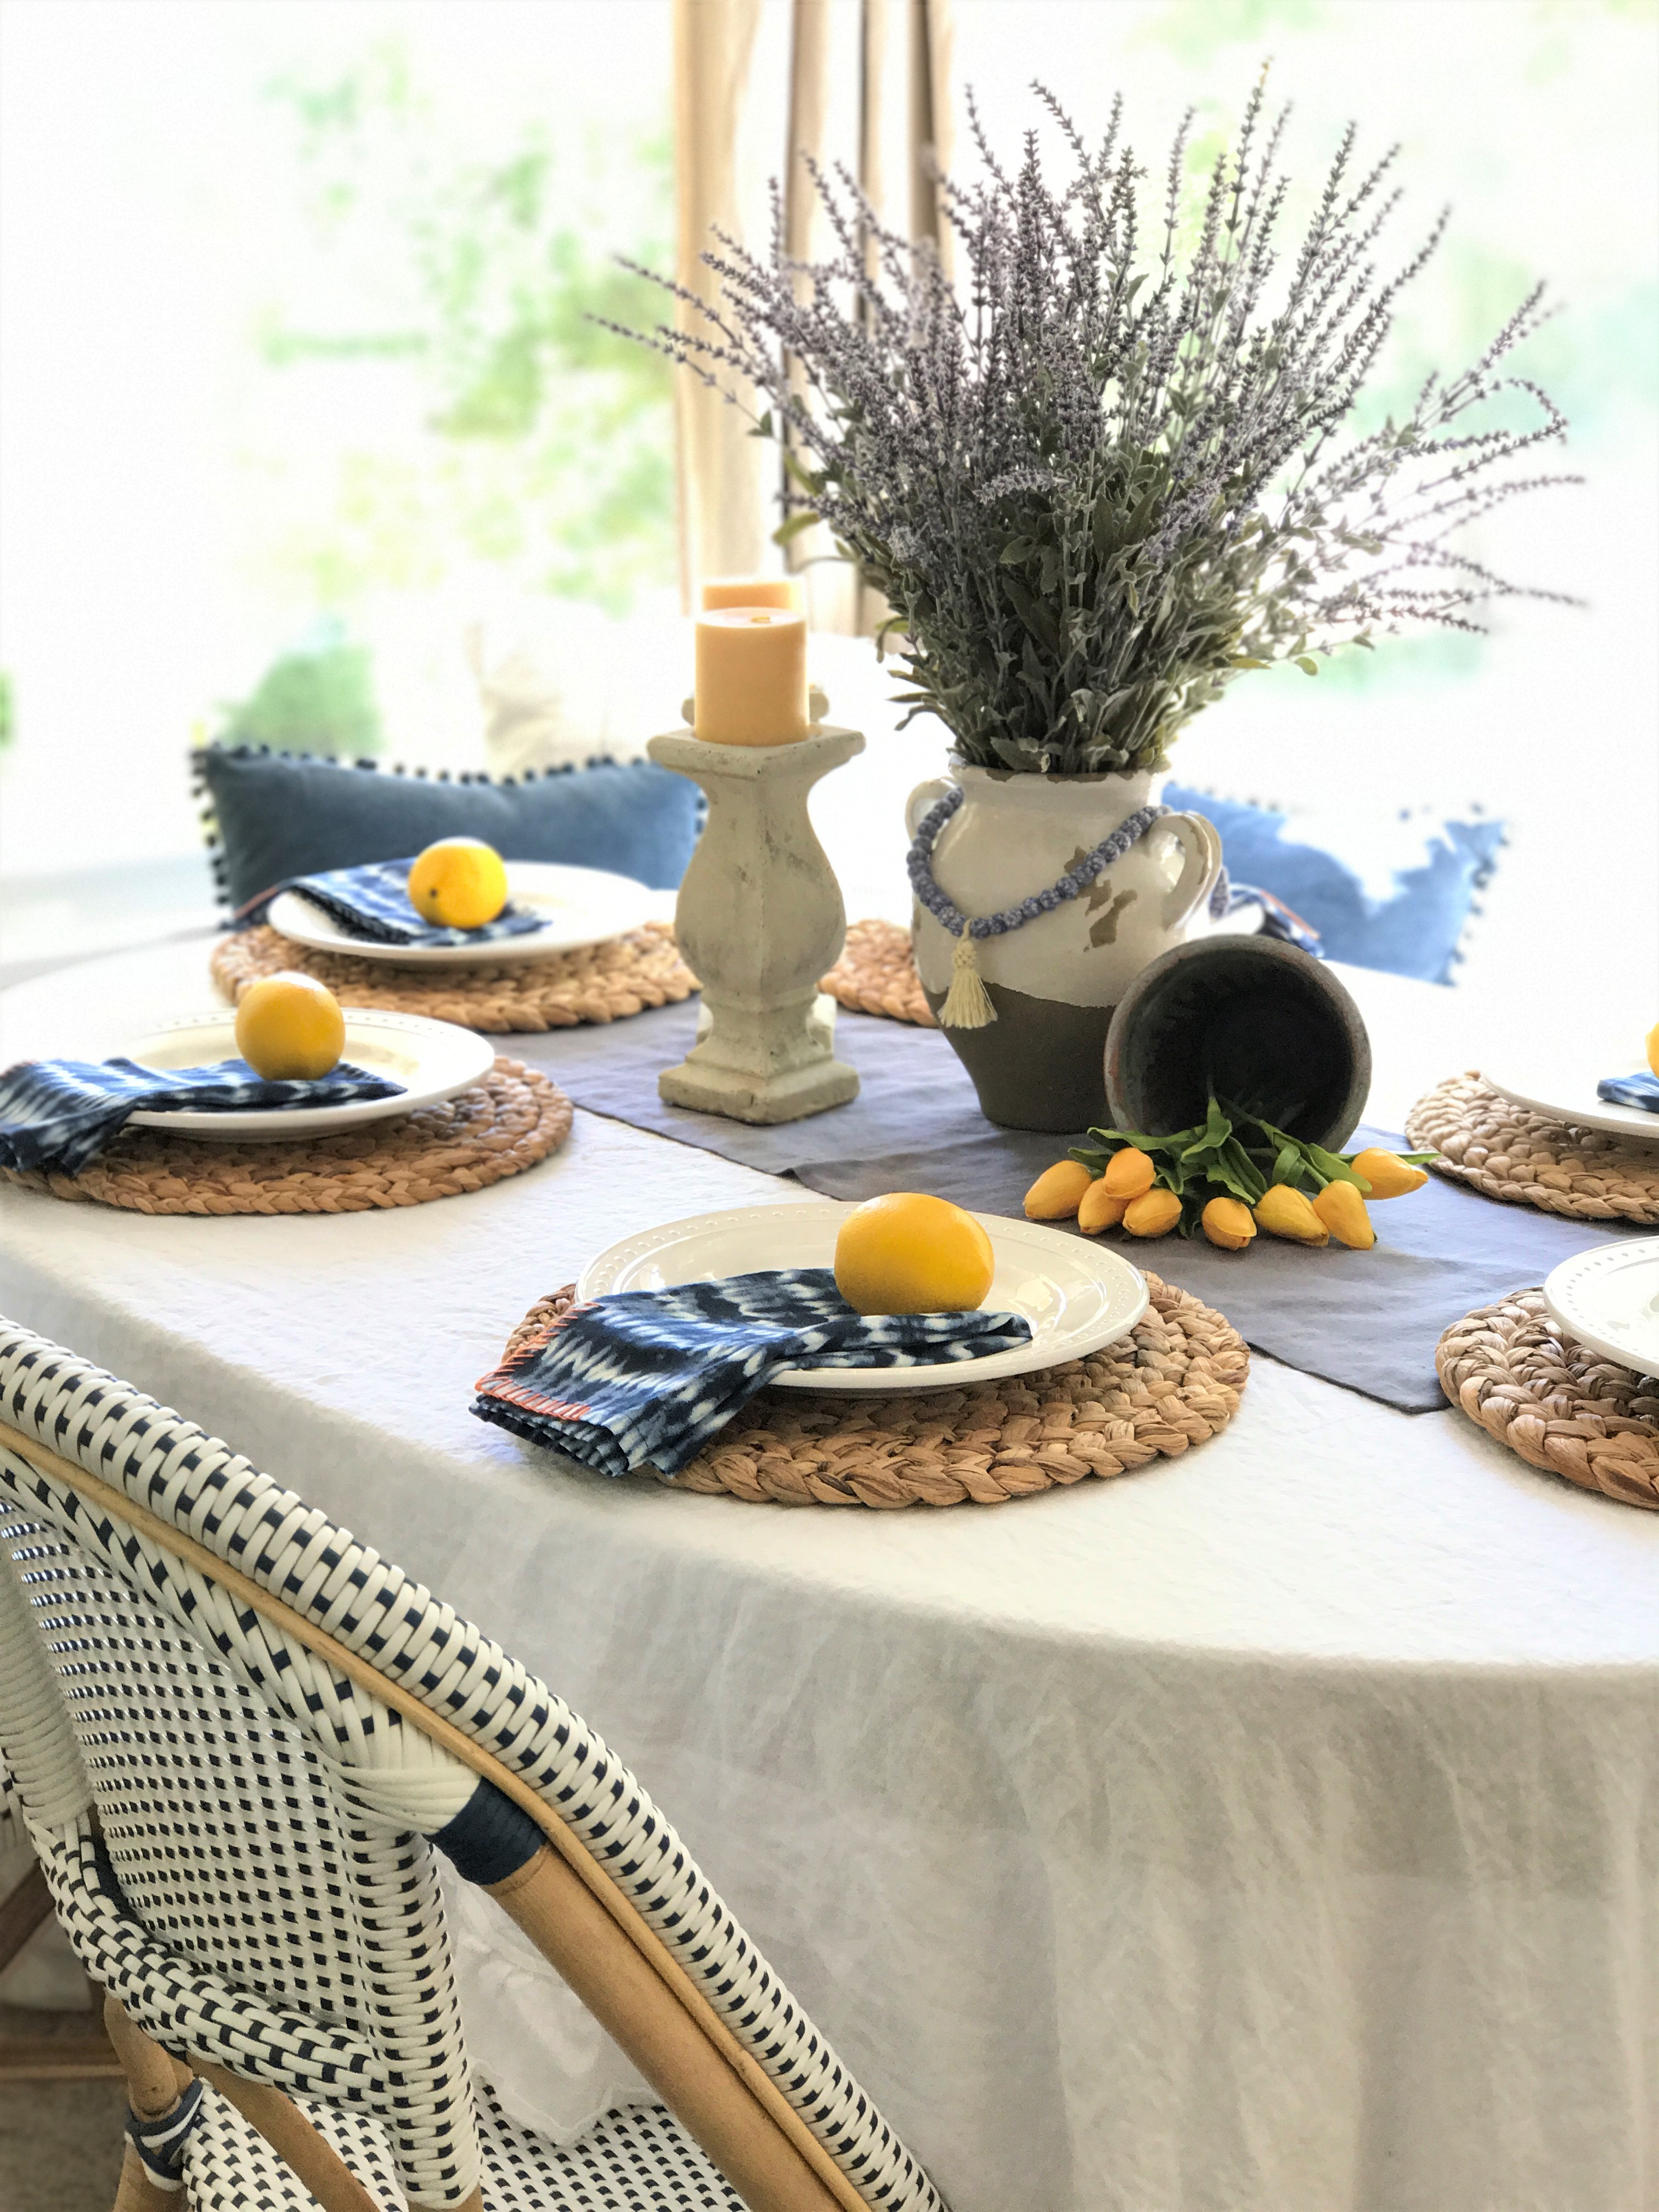 Summer Tables for Farmhouse Style Made Easy